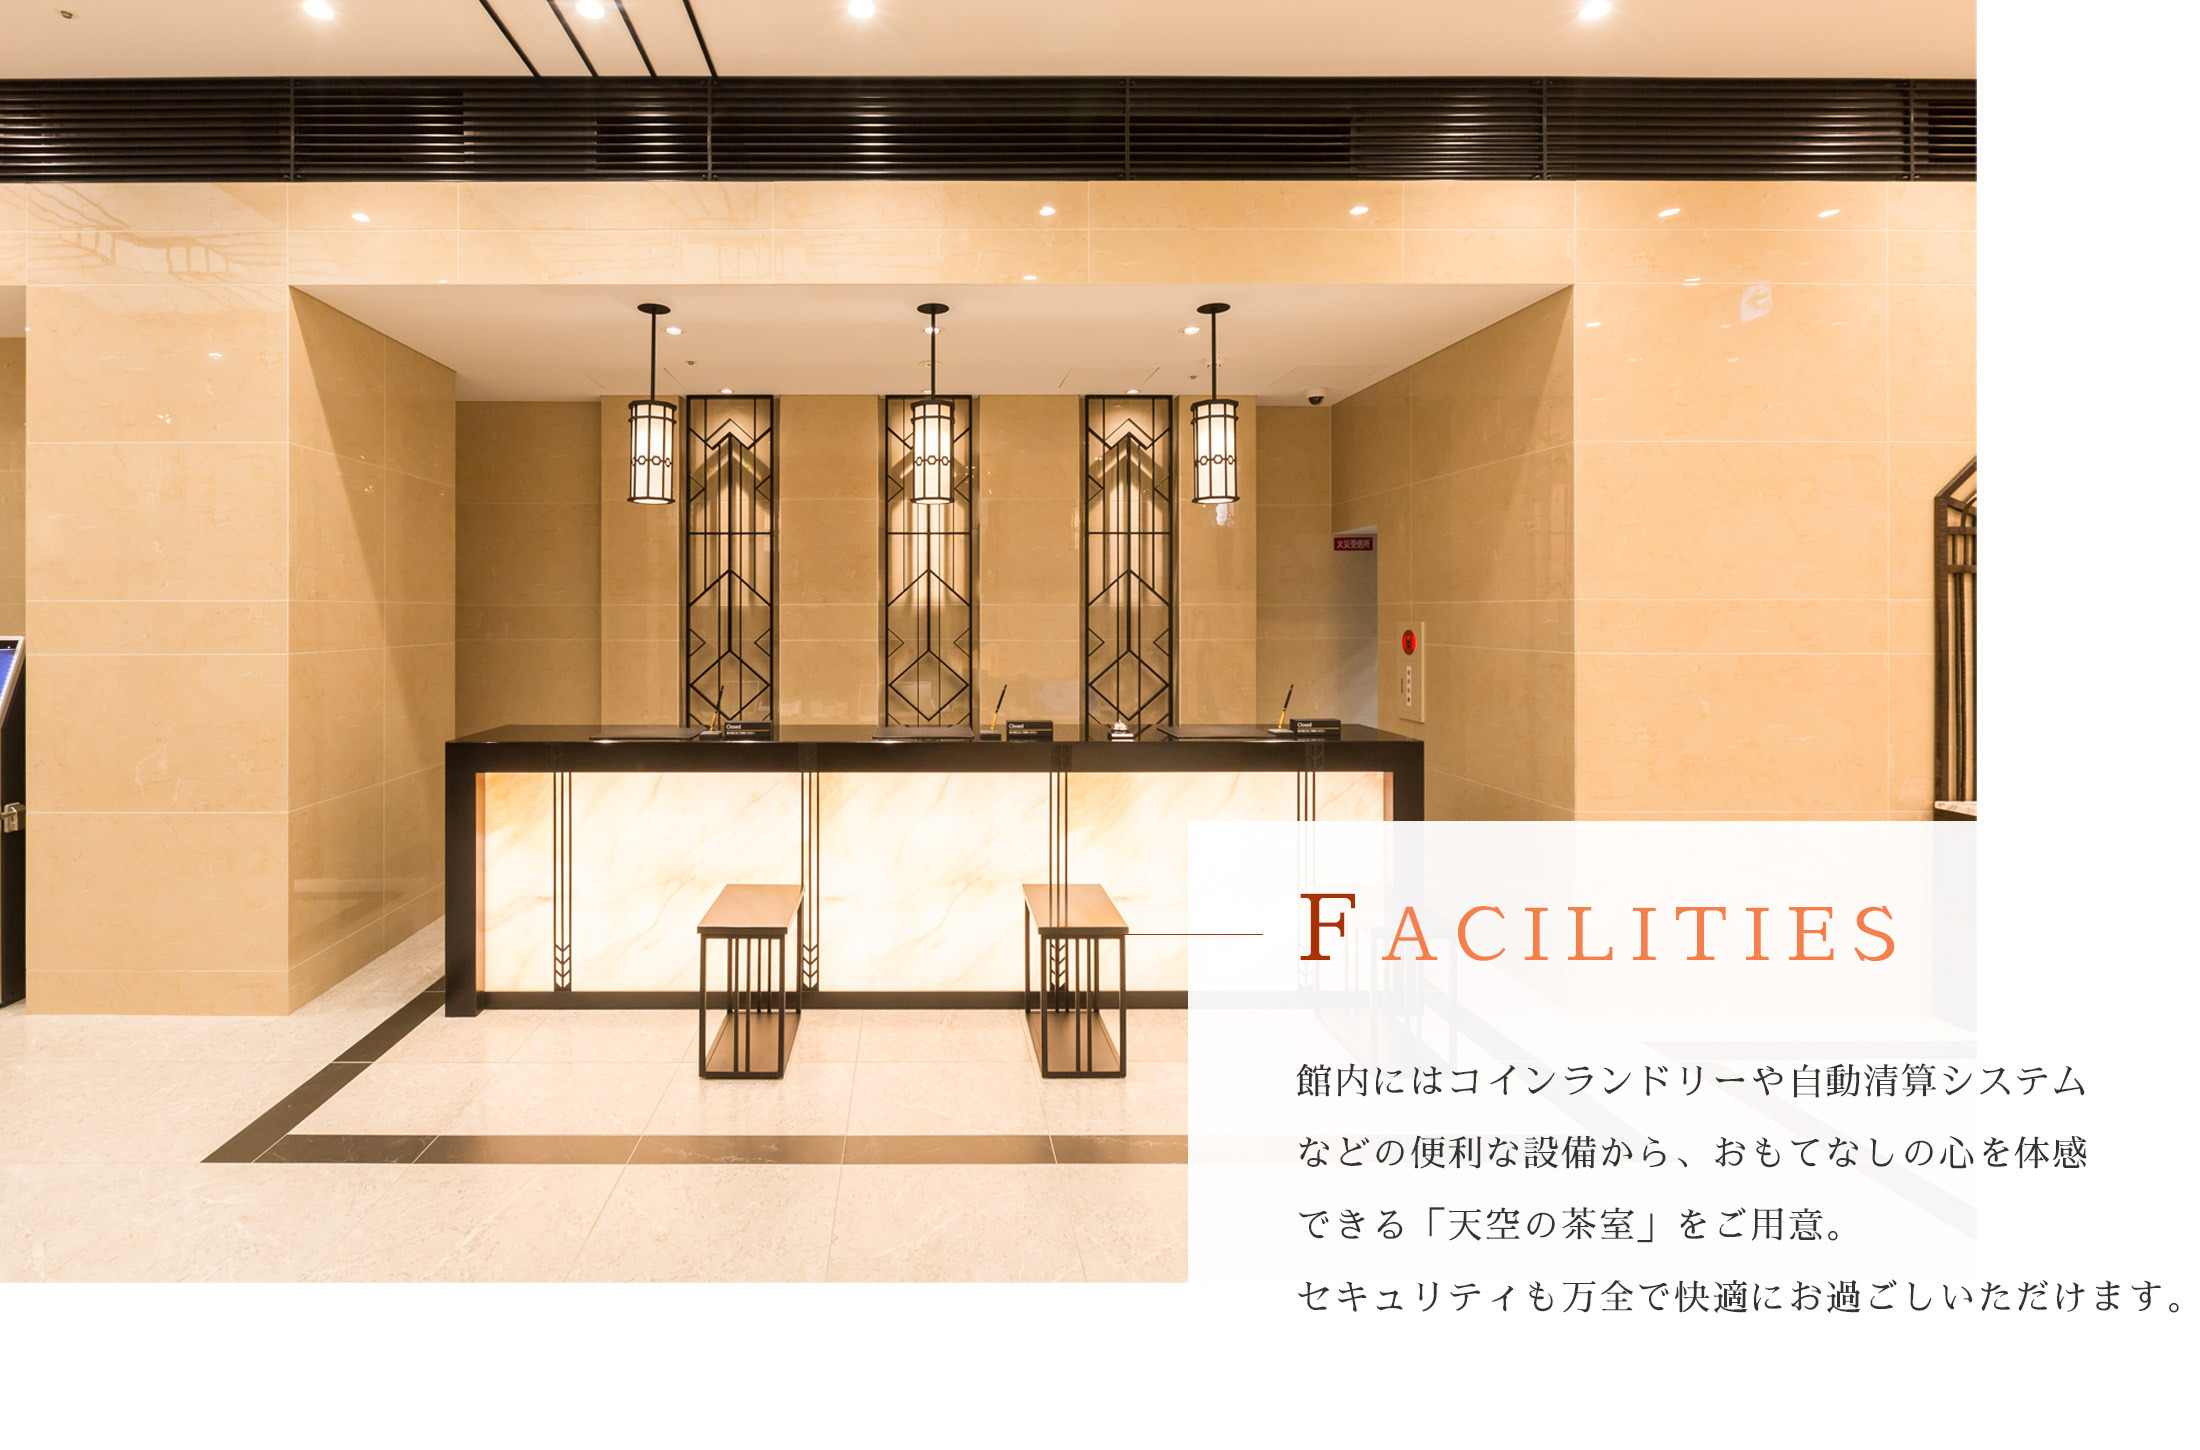 About Facilities